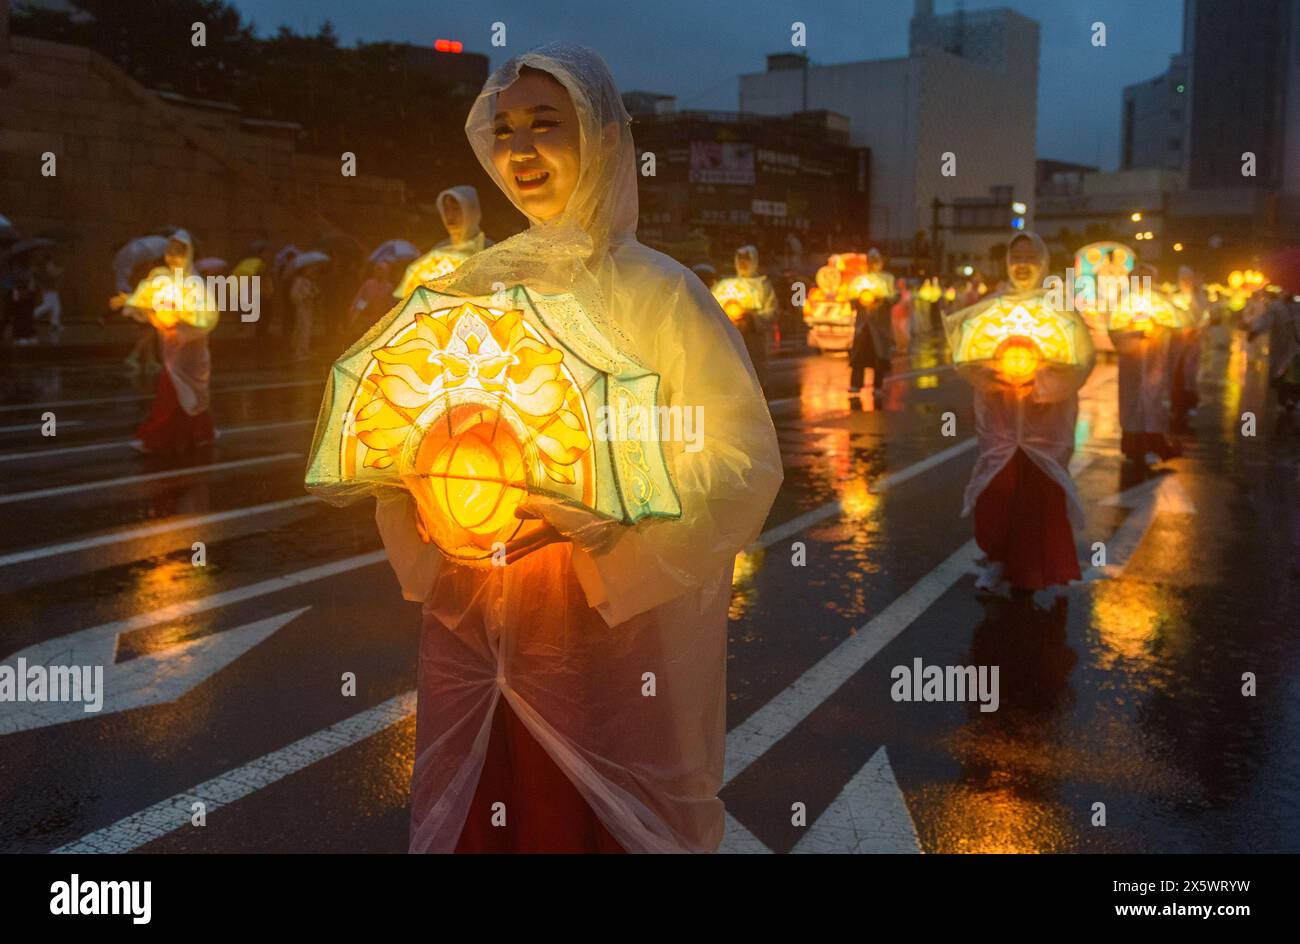 A South Korean Buddhist takes part in the Lotus Lantern Festival to celebrate the upcoming Buddha's Birthday in Seoul. Buddha's Birthday is a Buddhist festival celebrated mostly in South Asia, Southeast Asia, and much of East Asia, marking the birth of Siddhartha Gothama, the prince who became the Gothama Buddha and founded Buddhism. According to Buddhist traditions and archaeologists, the Gothama Buddha was born around 563-483 B.C. in Lumbini, Nepal. In Korea, Buddha's birthday is celebrated according to the Korean lunar calendar and is a national holiday. (Photo by Kim Jae-Hwan/SOPA Images Stock Photo